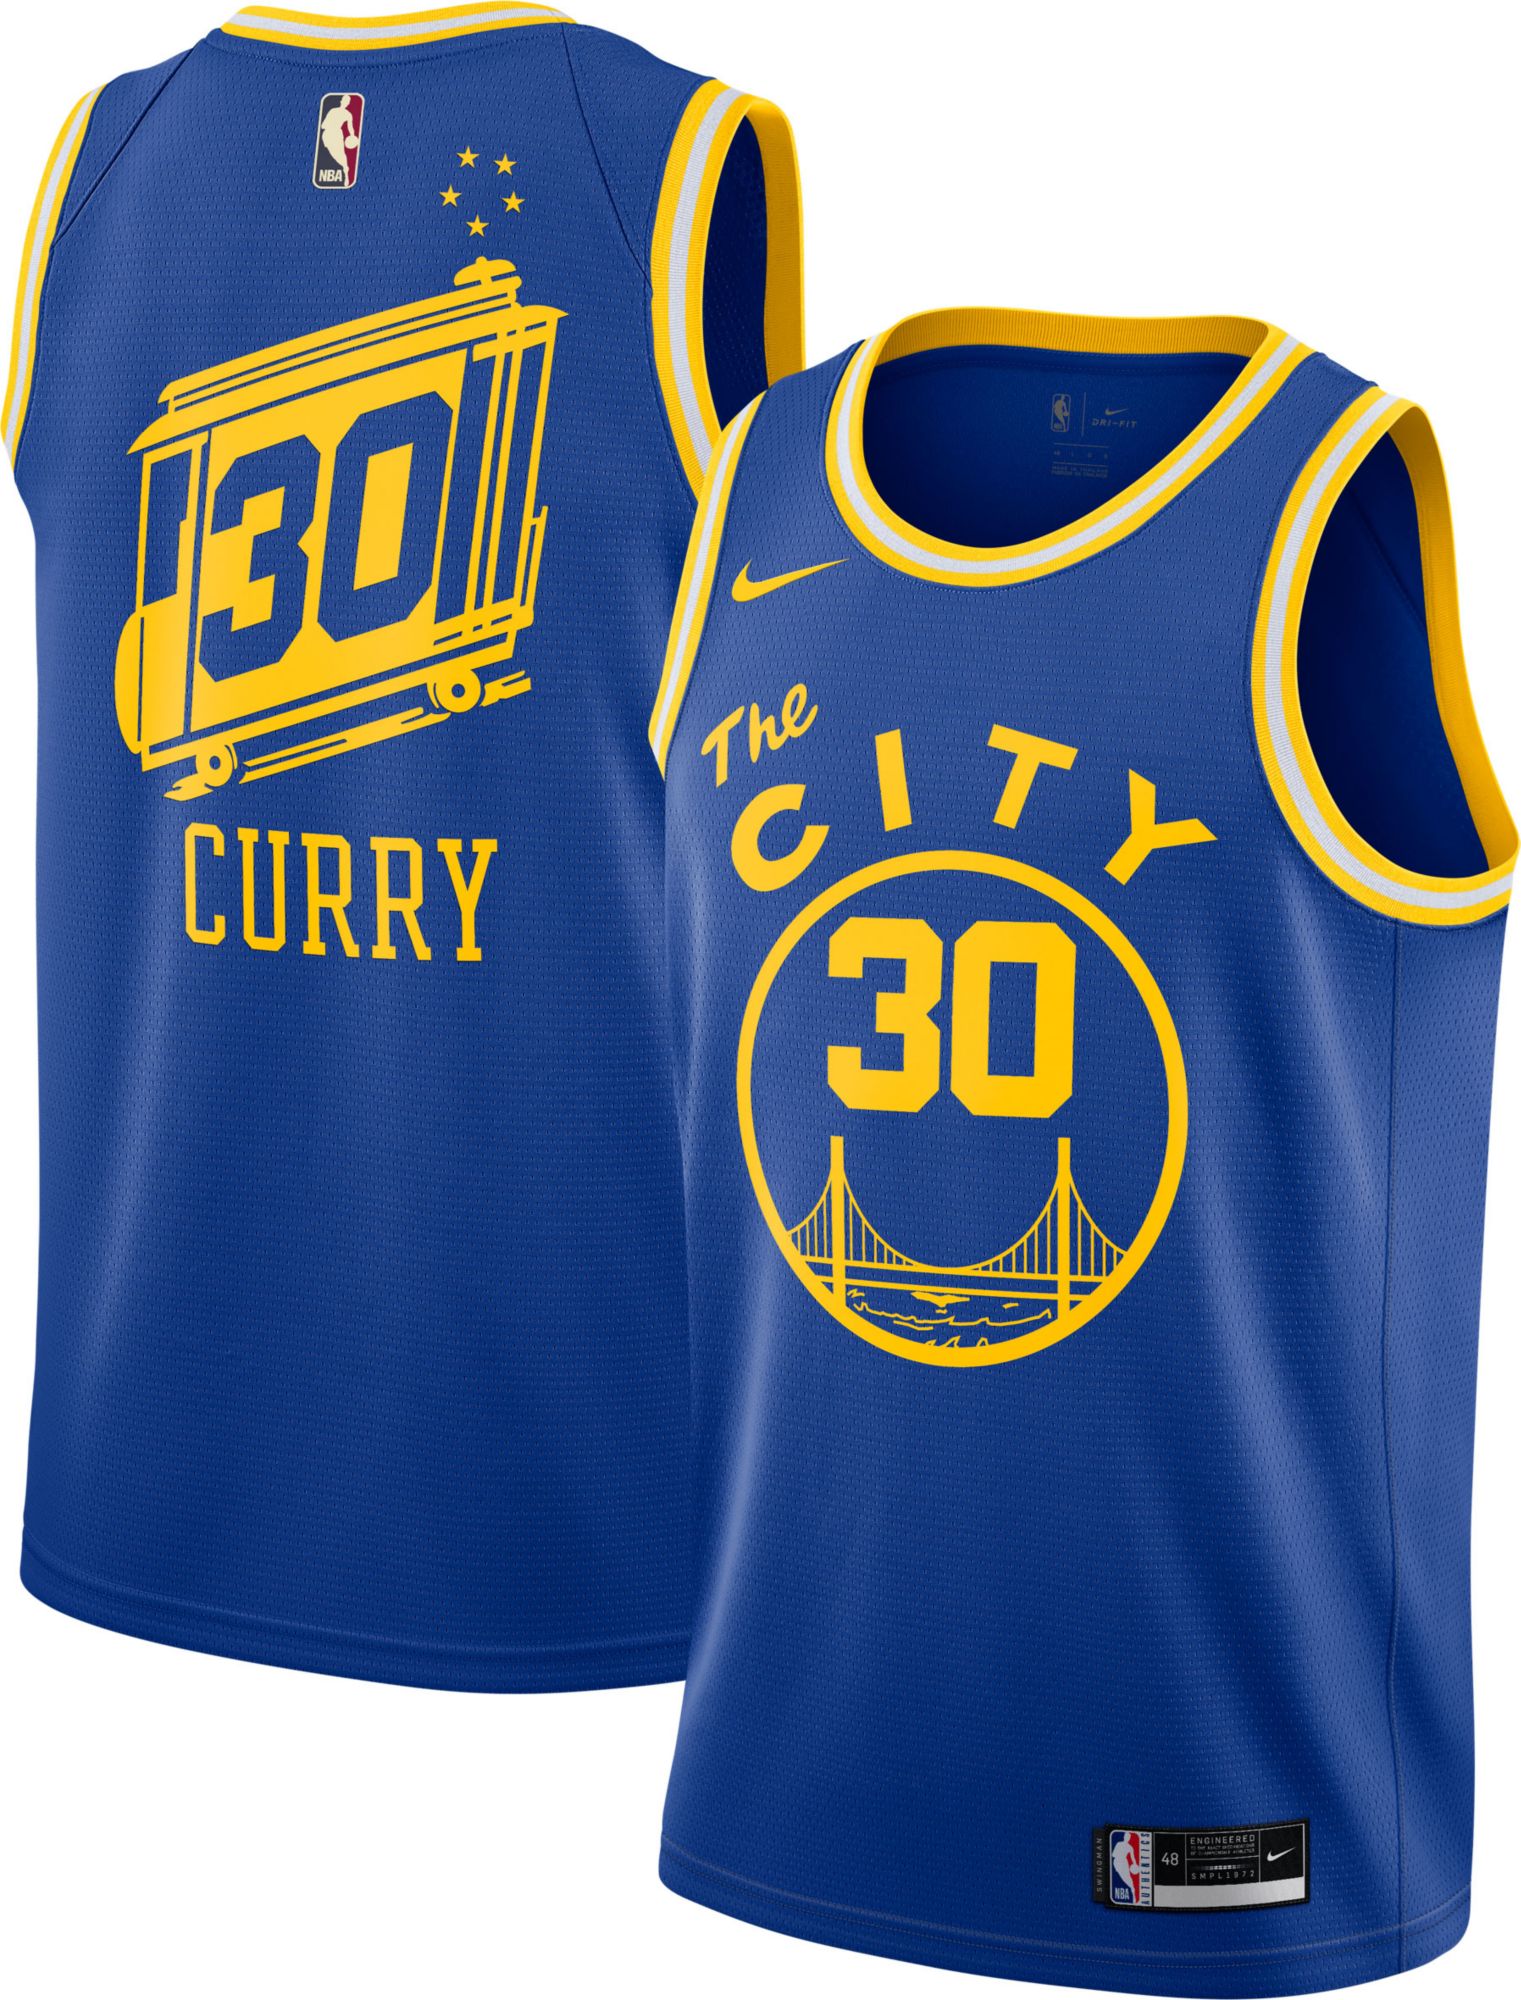 adidas curry jersey youth